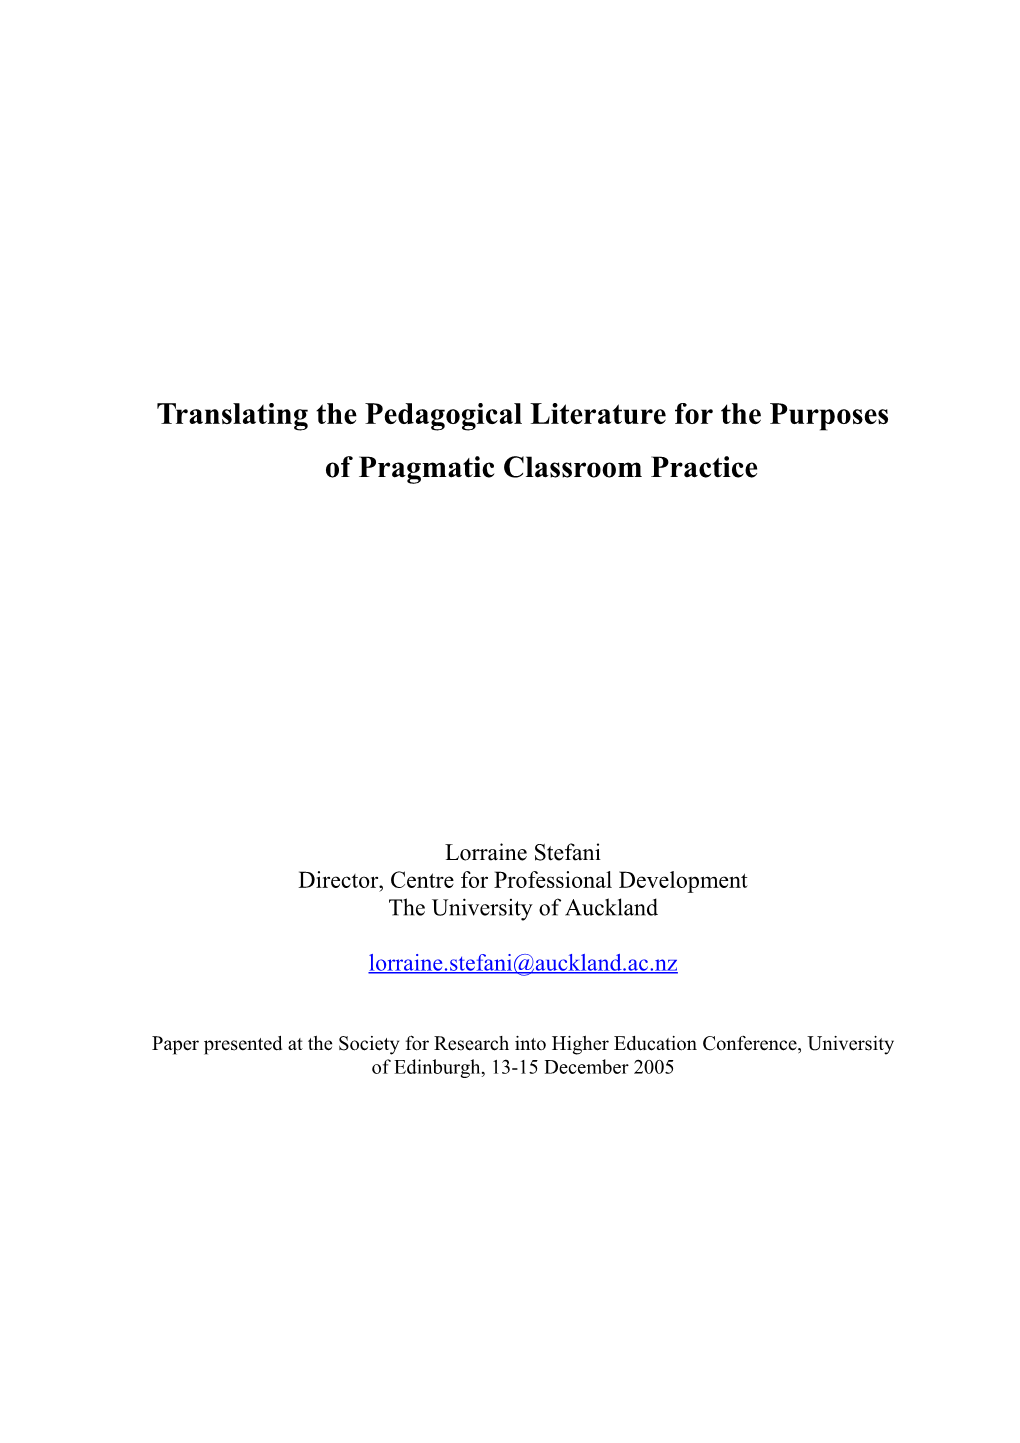 Translating the Pedagogical Literature for the Purposes of Pragmatic Classroom Practice